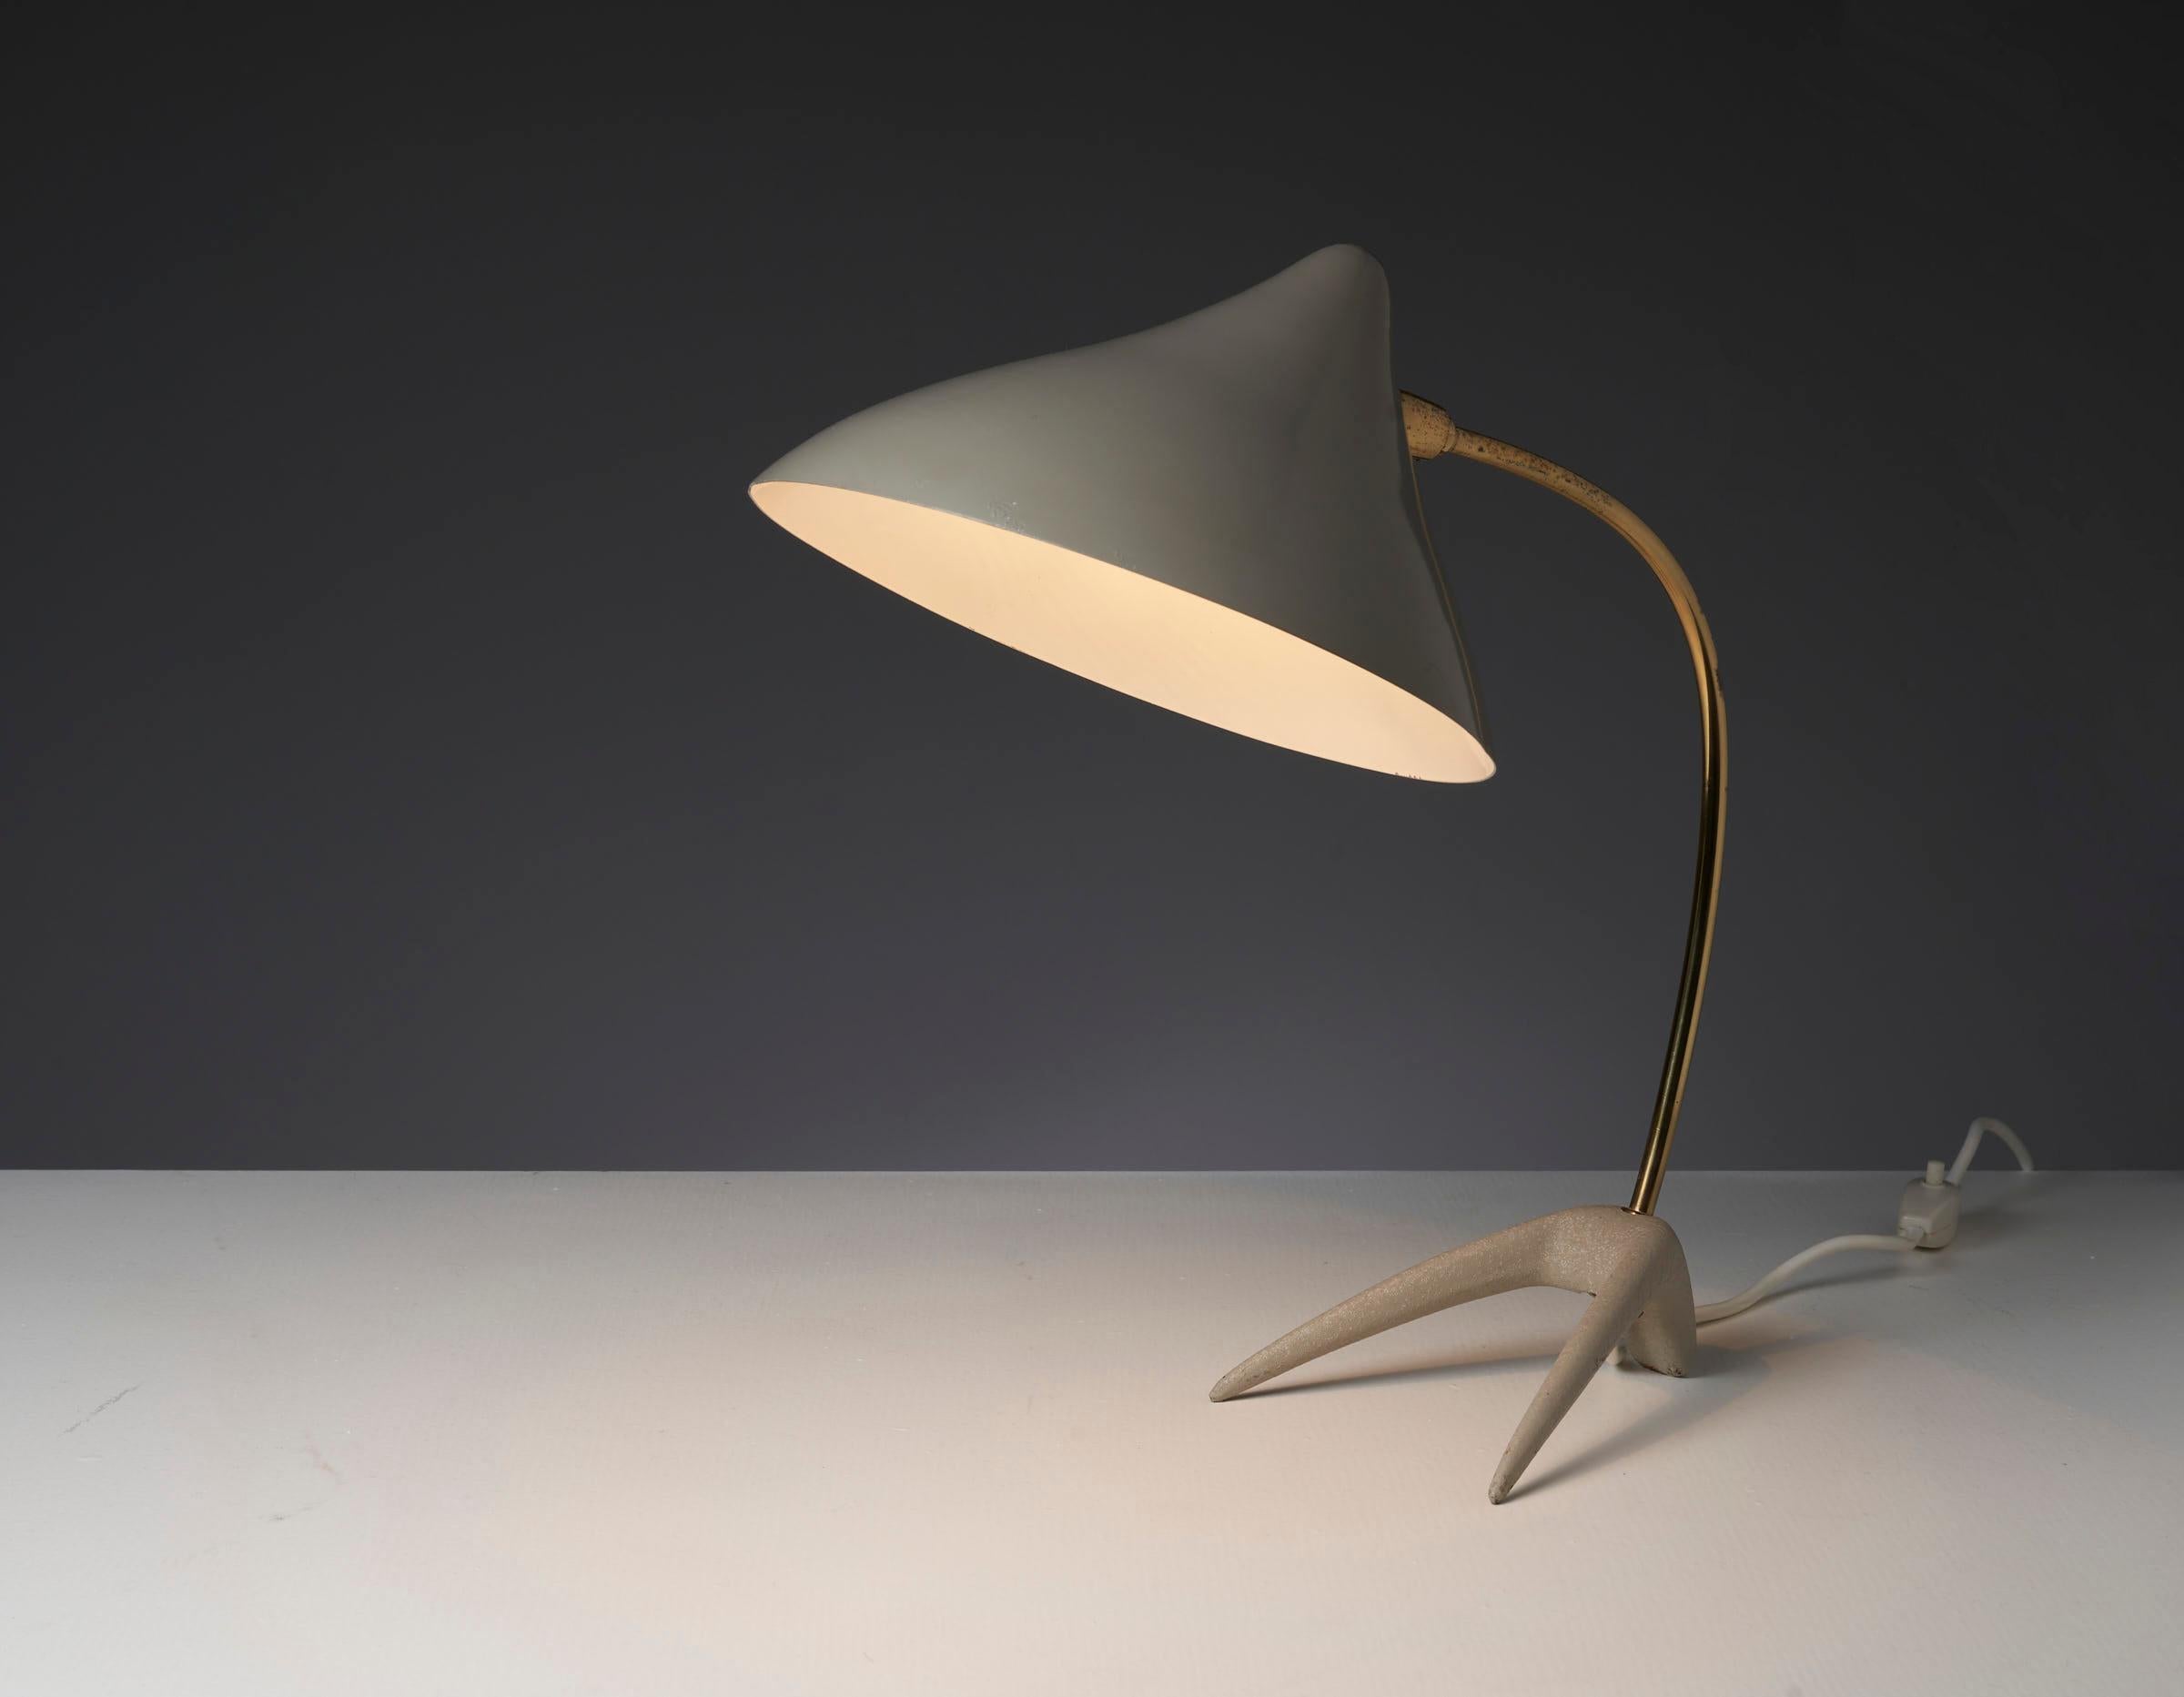 'Crowfoot' desk lamp, designed by Karl-Heinz Kinsky for Cosack in the 1950s. This table lamp is easily recognized by its particular tripod base, resembling a Crow's foot. It is made from cast iron which has a nice structure. The curved rod and joint